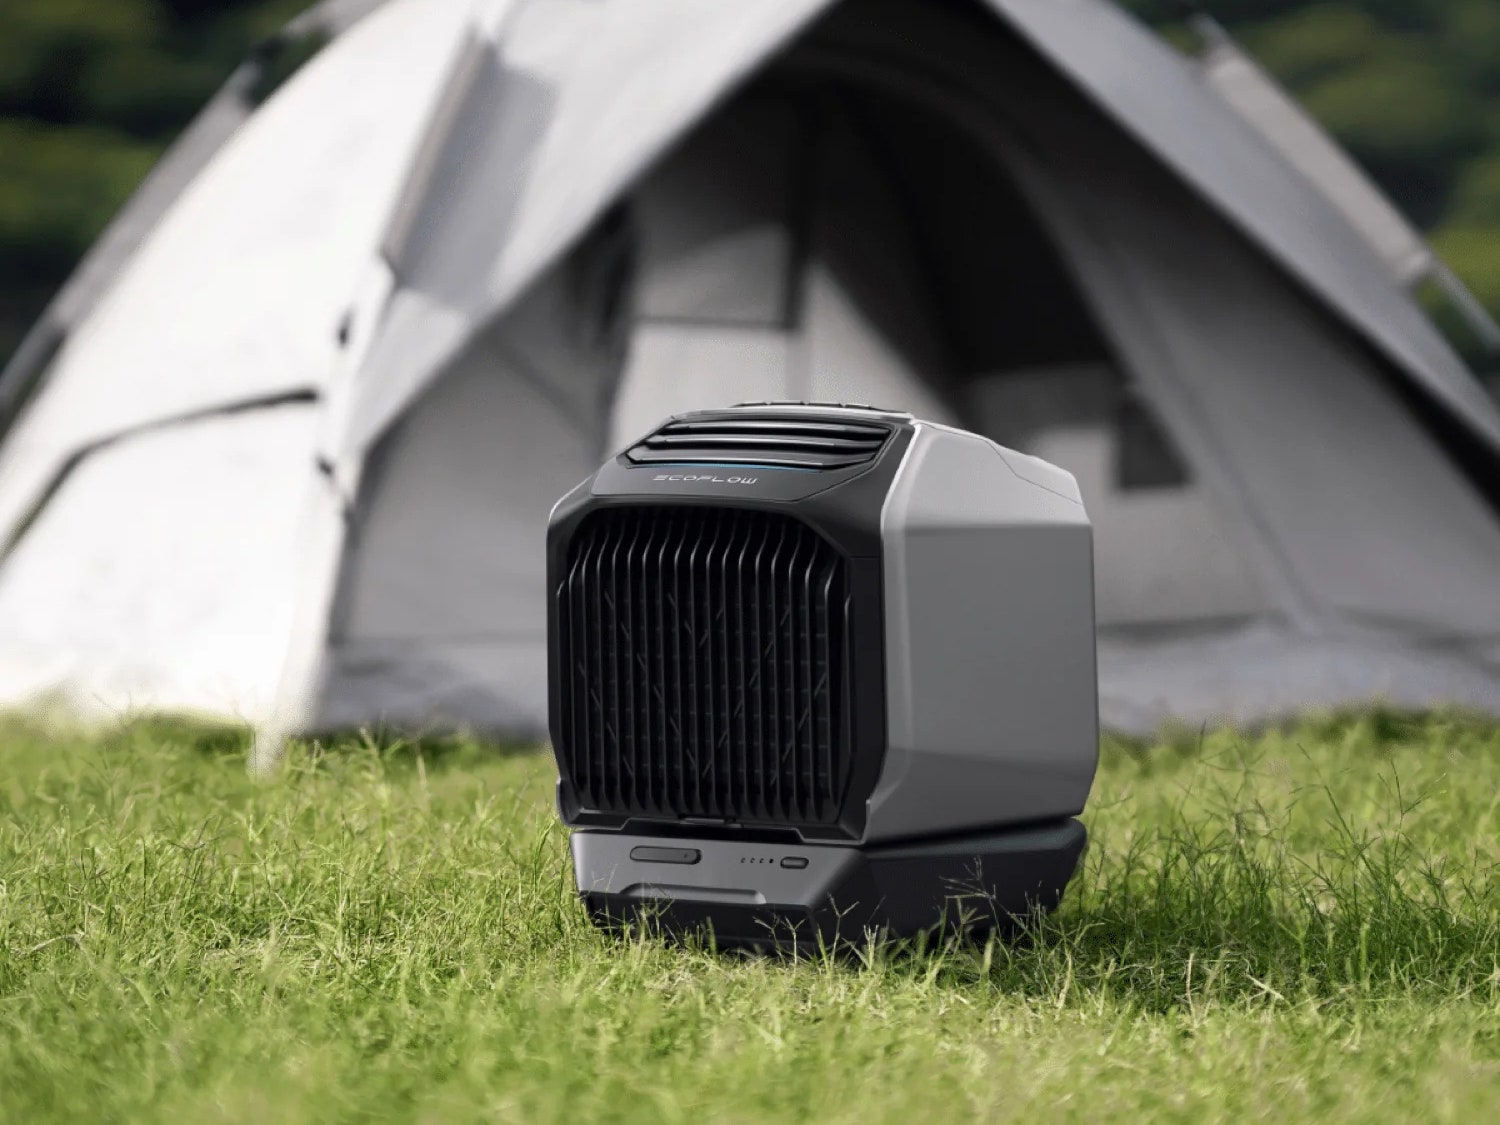 EcoFlow Wave 2 portable air conditioner outside near a tent